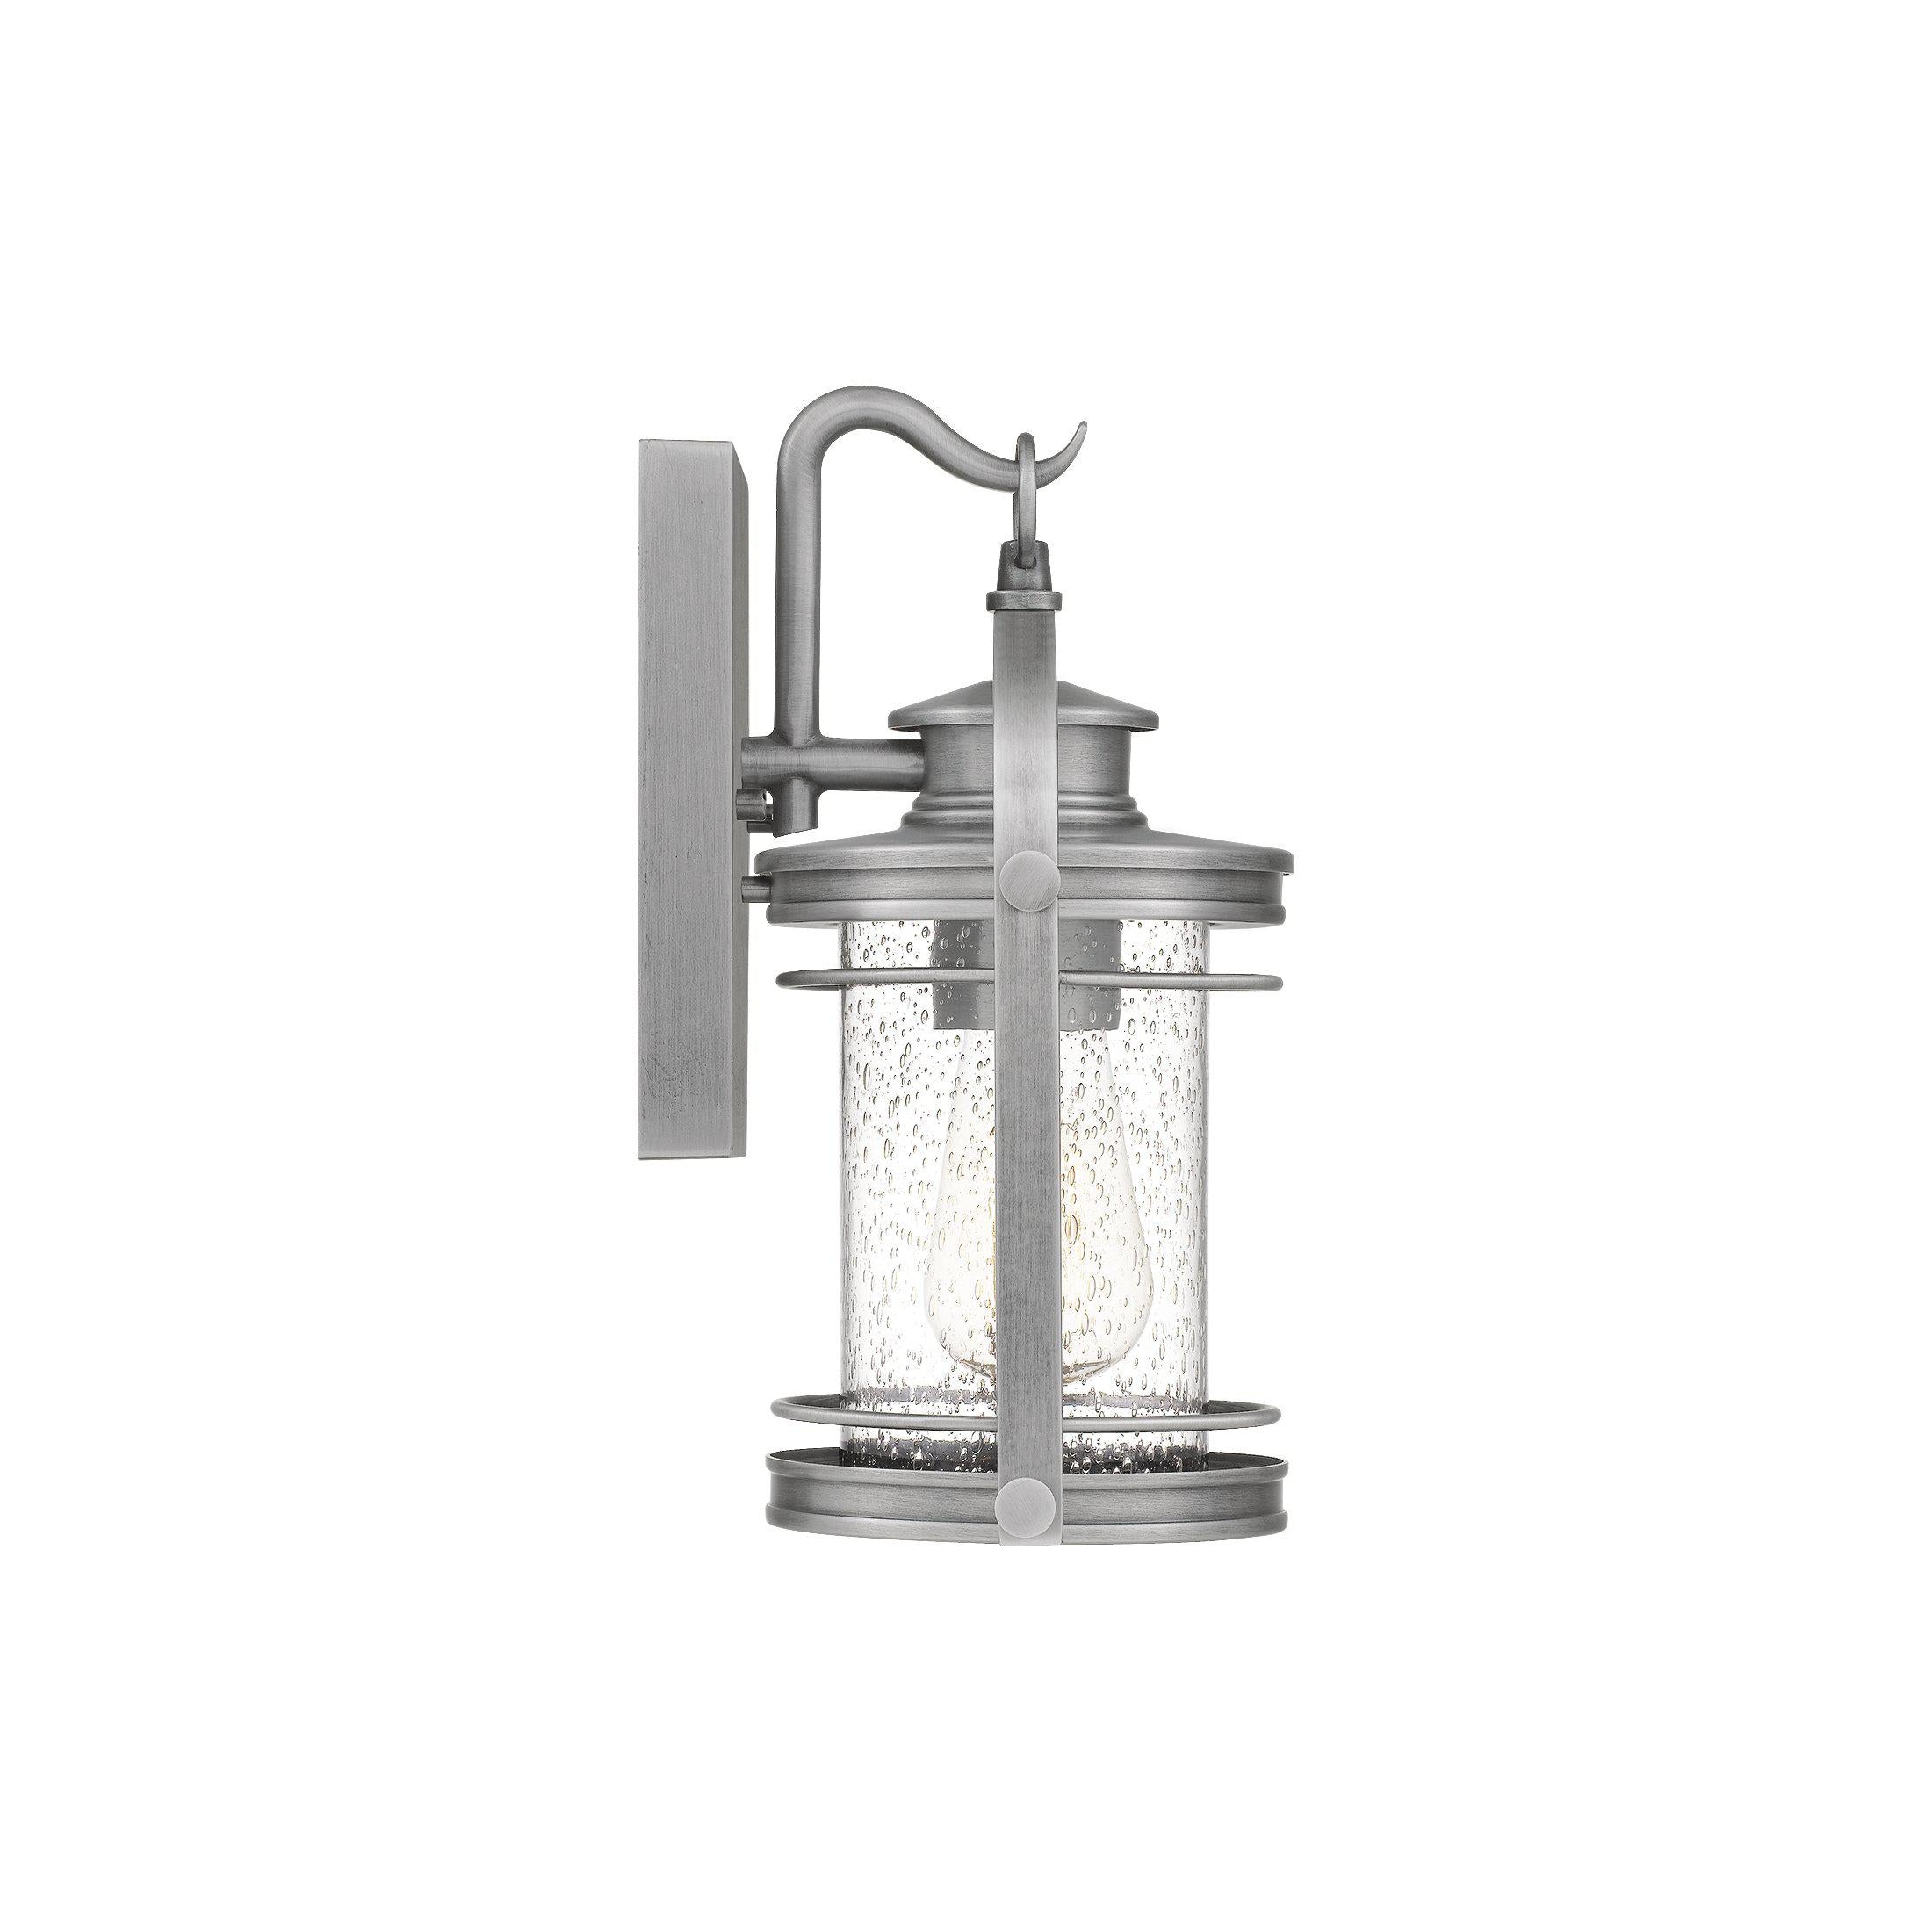 Quoizel  Booker Outdoor Lantern, Small Outdoor l Wall Quoizel   